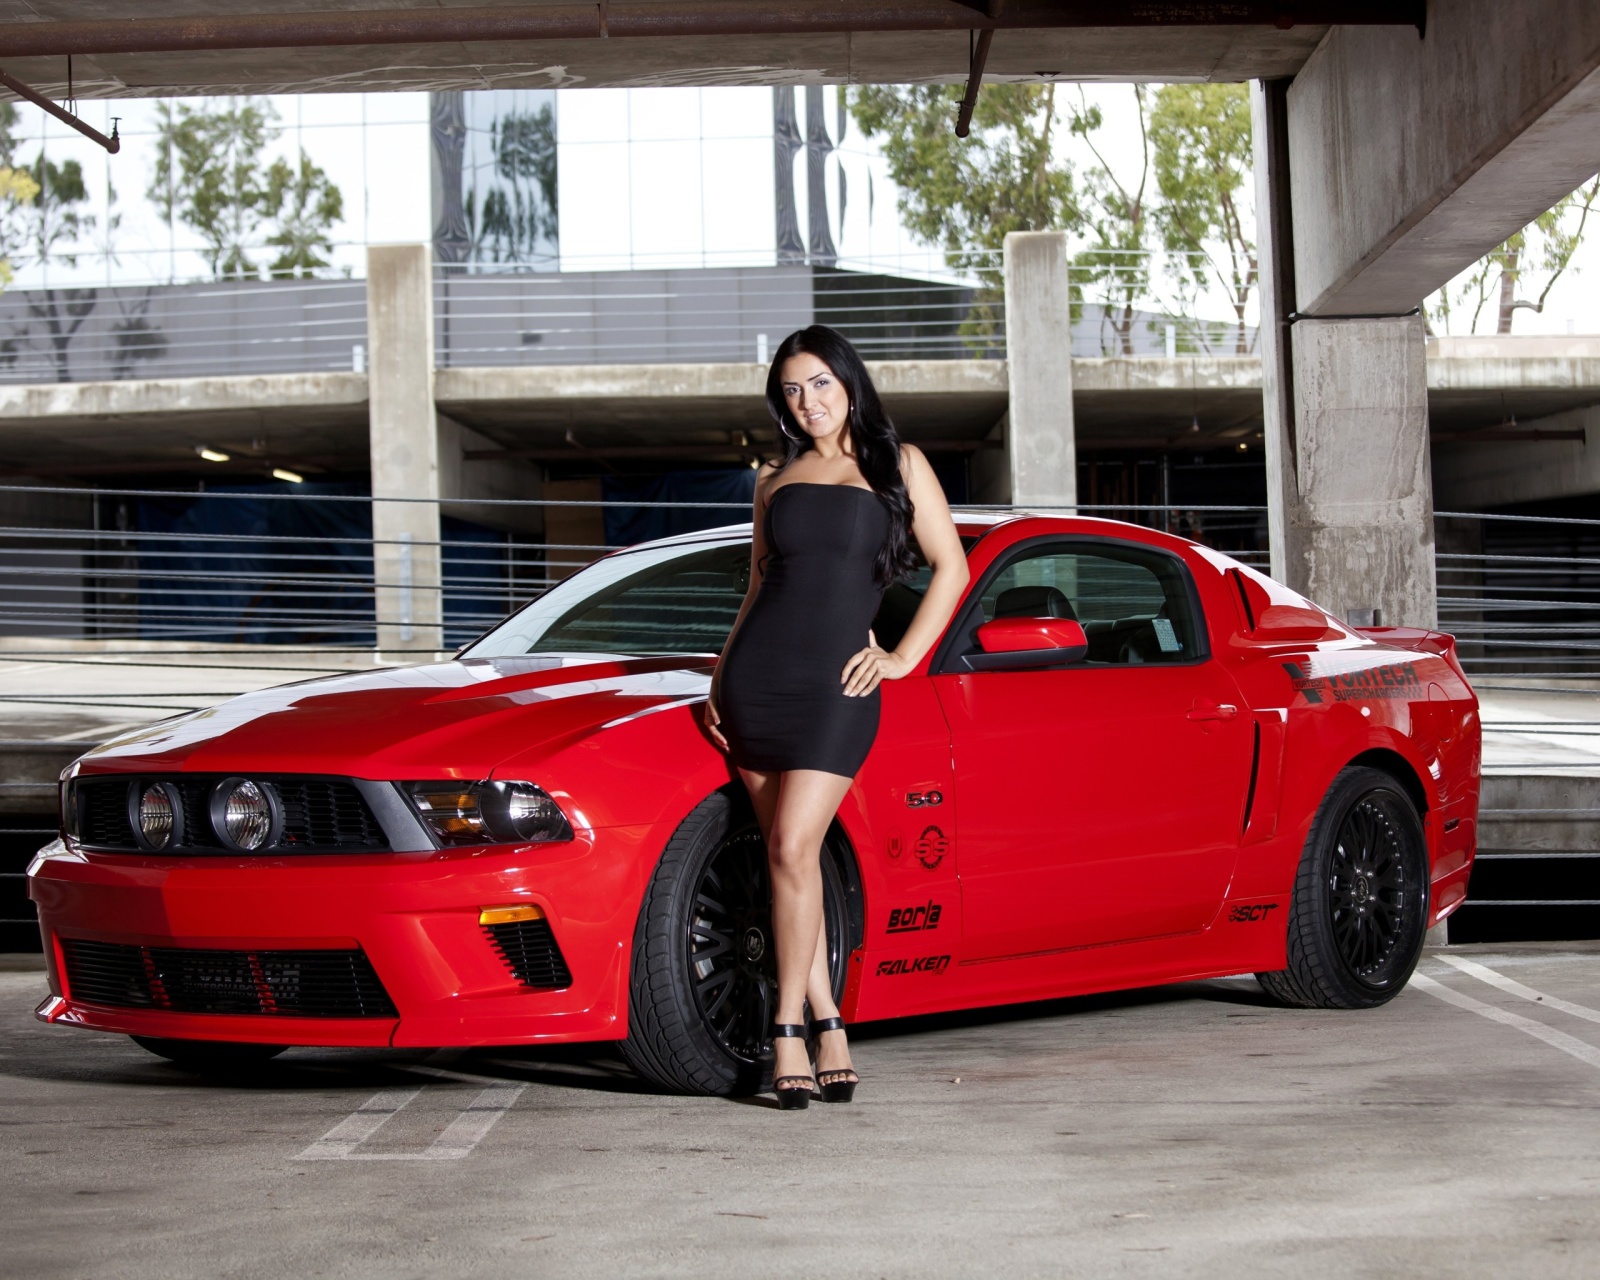 Ford Mustang GT Vortech with Brunette Girl wallpaper 1600x1280